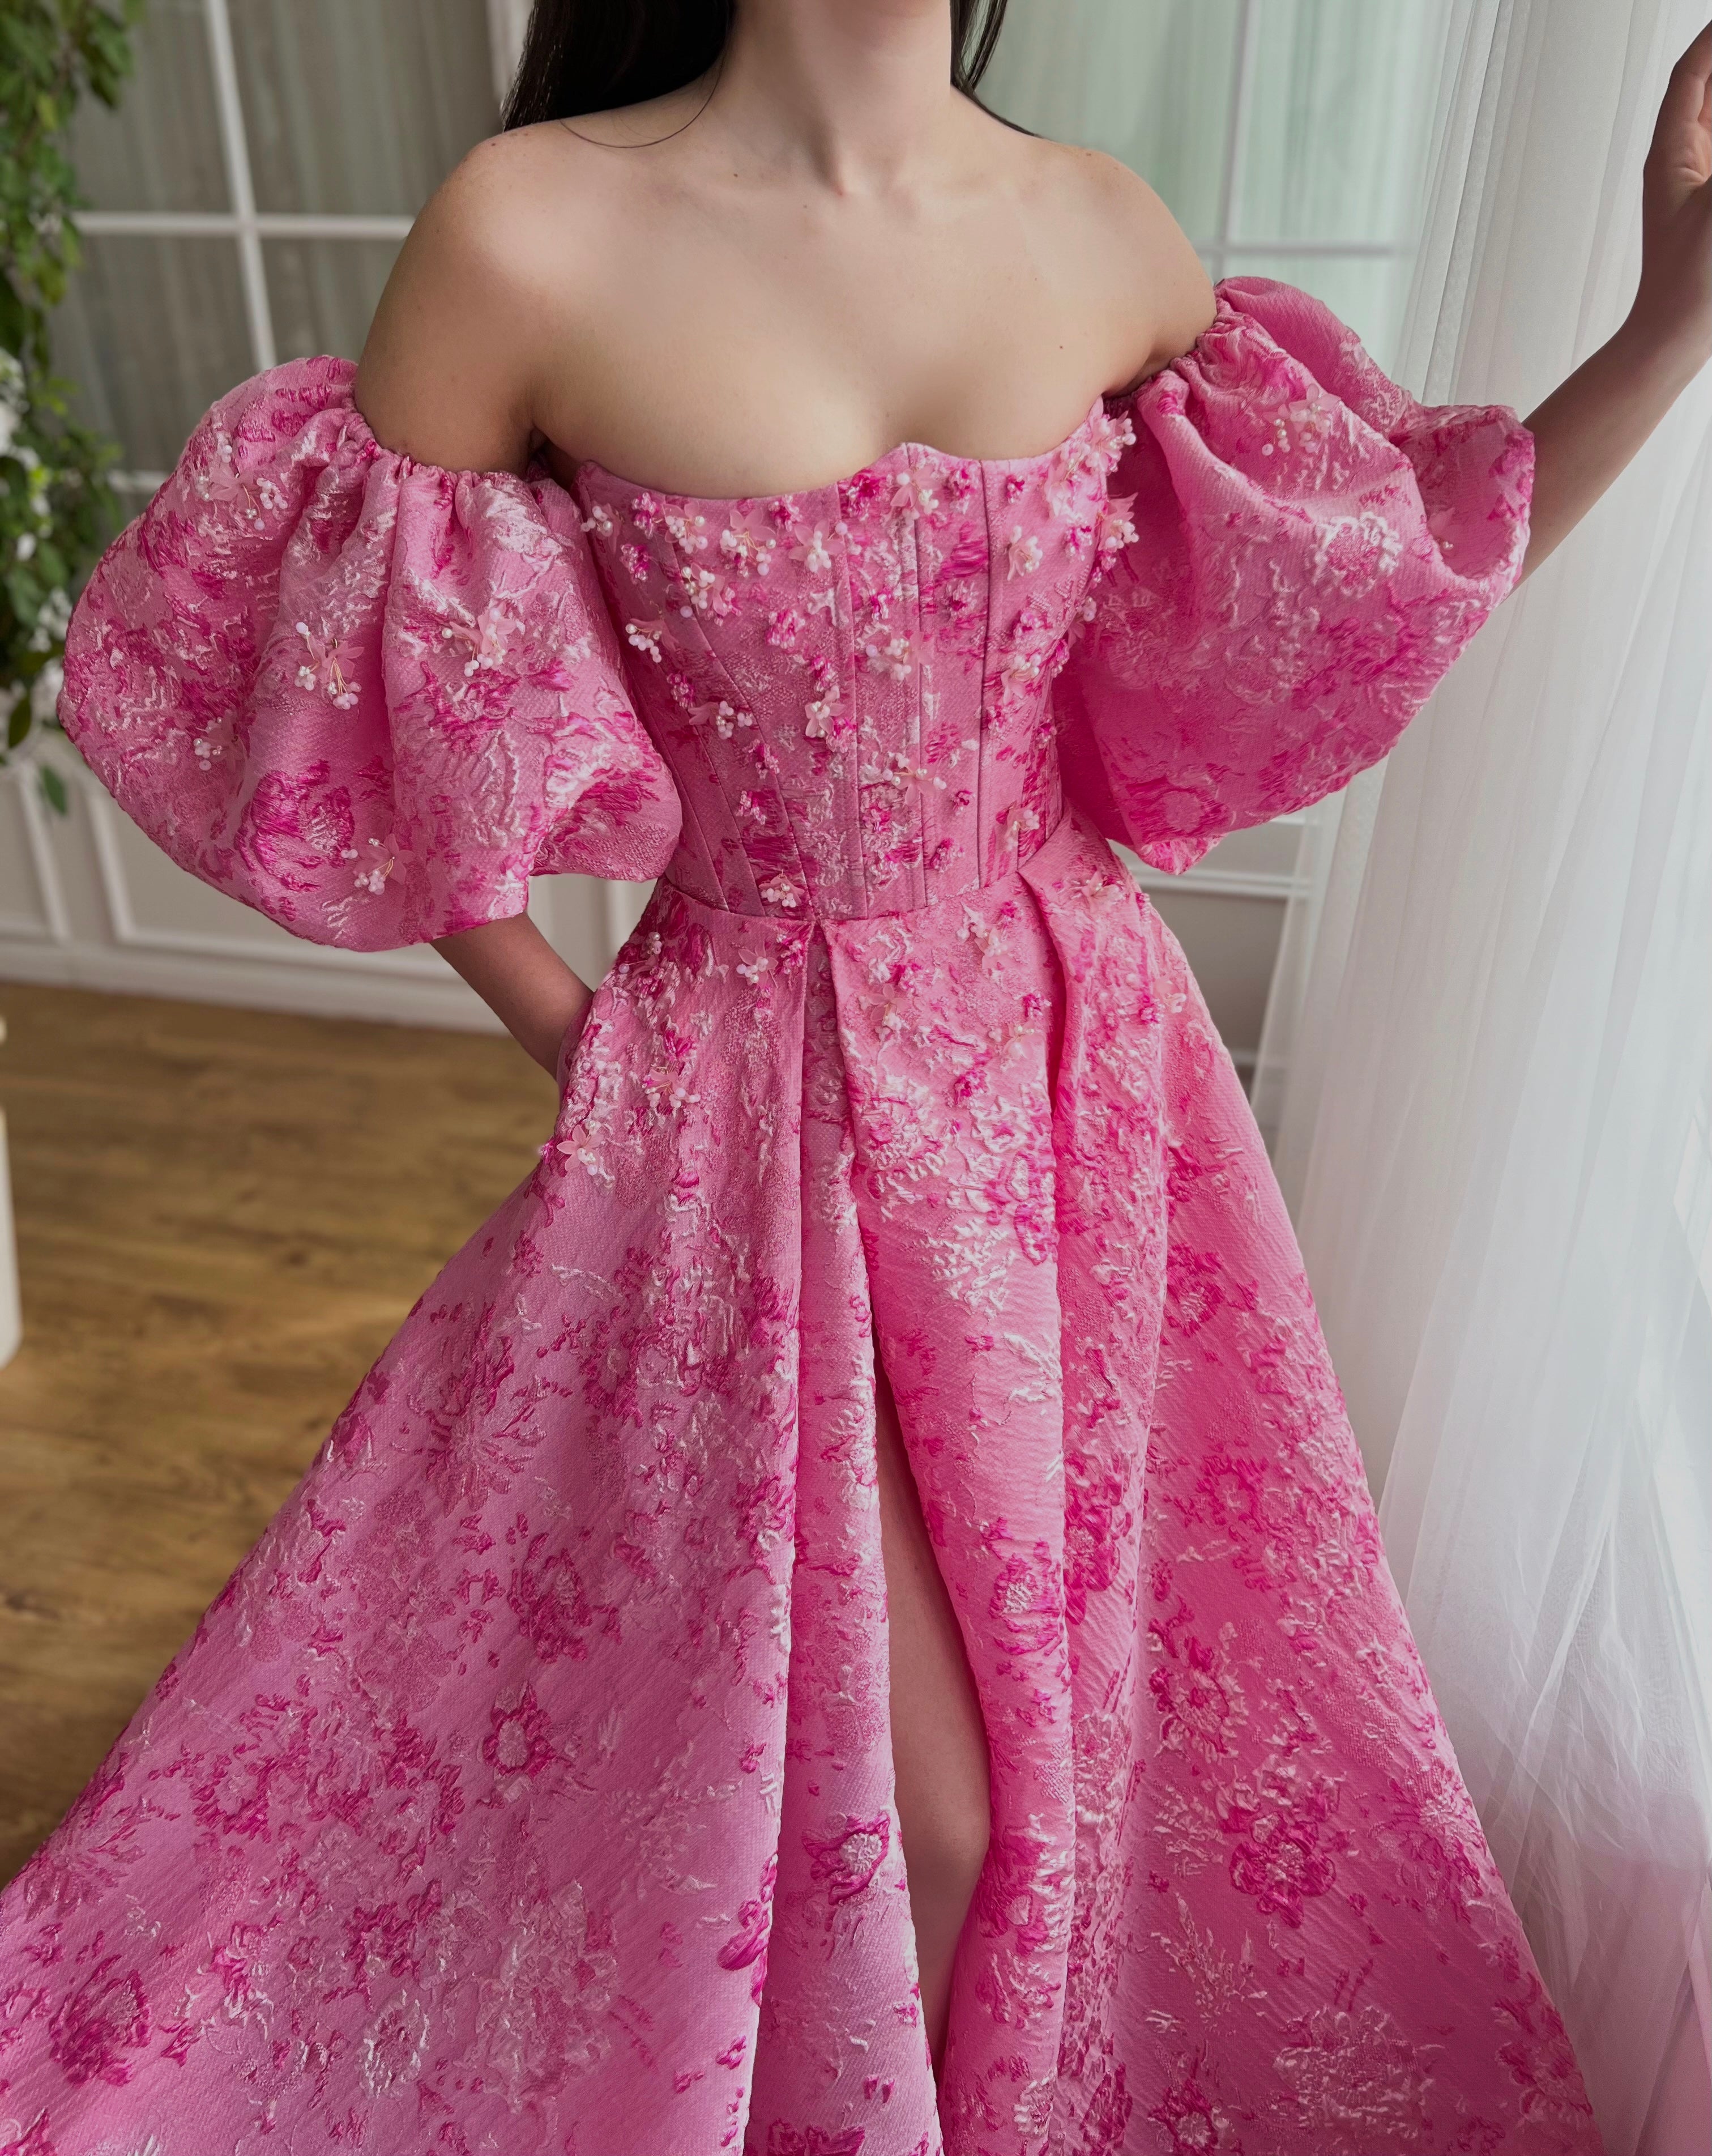 Pink A-Line dress with embroidery and short off the shoulder sleeves